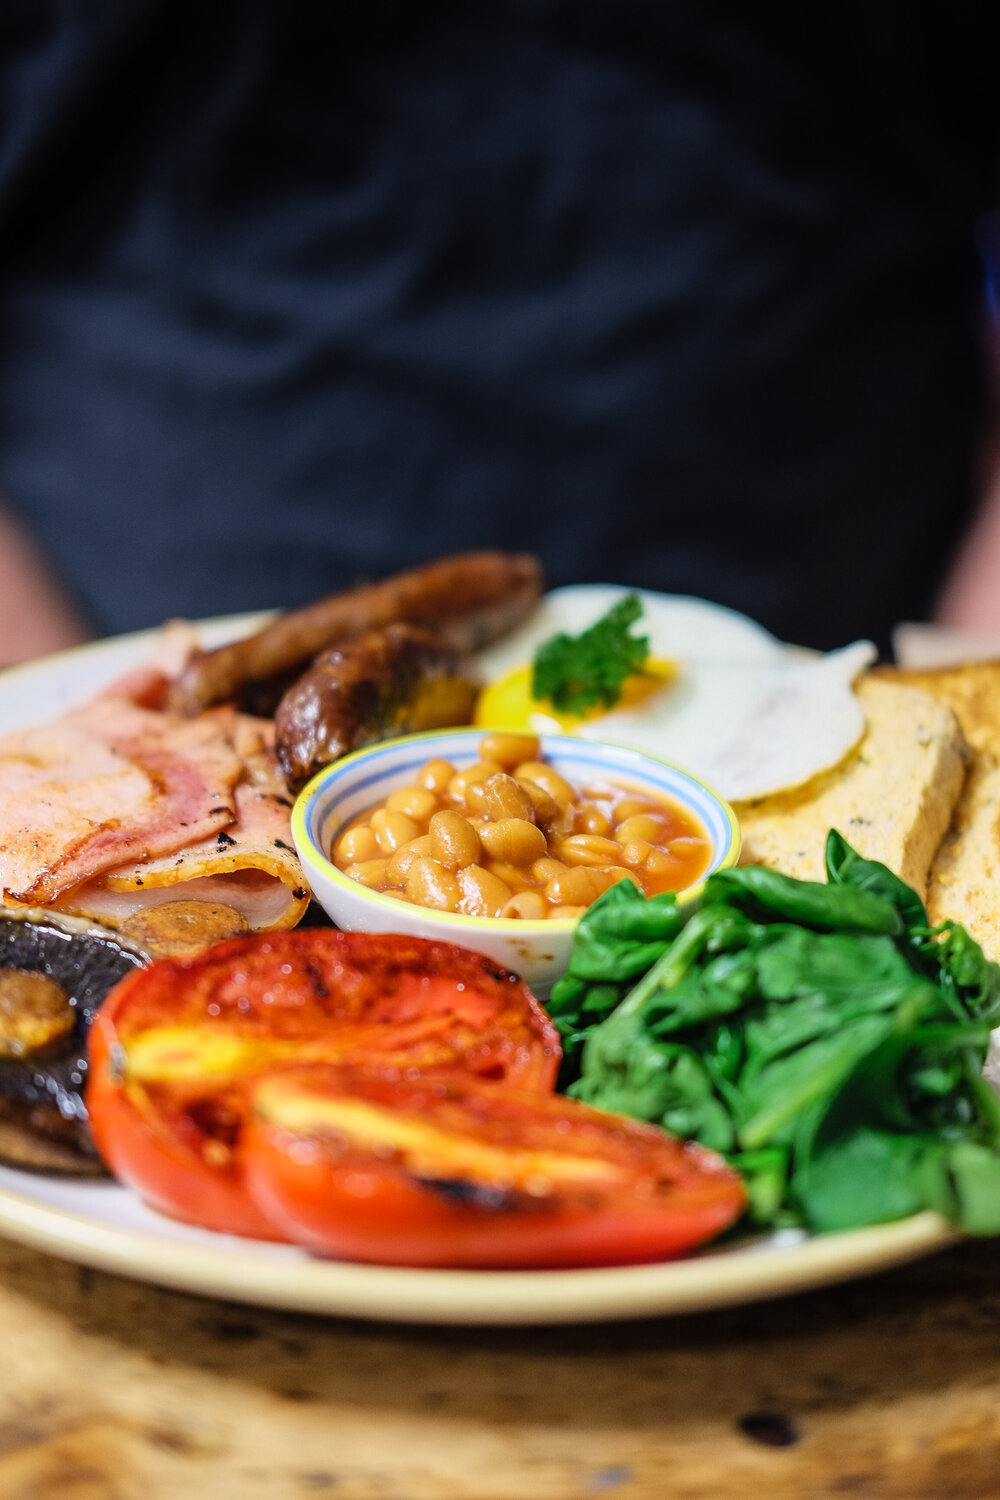  Go out for a traditional Irish breakfast - it’s a feast of bacon or rashers, sausages, black and white puddings (which are a type of sausage) eggs, mushrooms, grilled tomatoes, and Irish soda bread - all cooked in fresh Irish creamery butter 